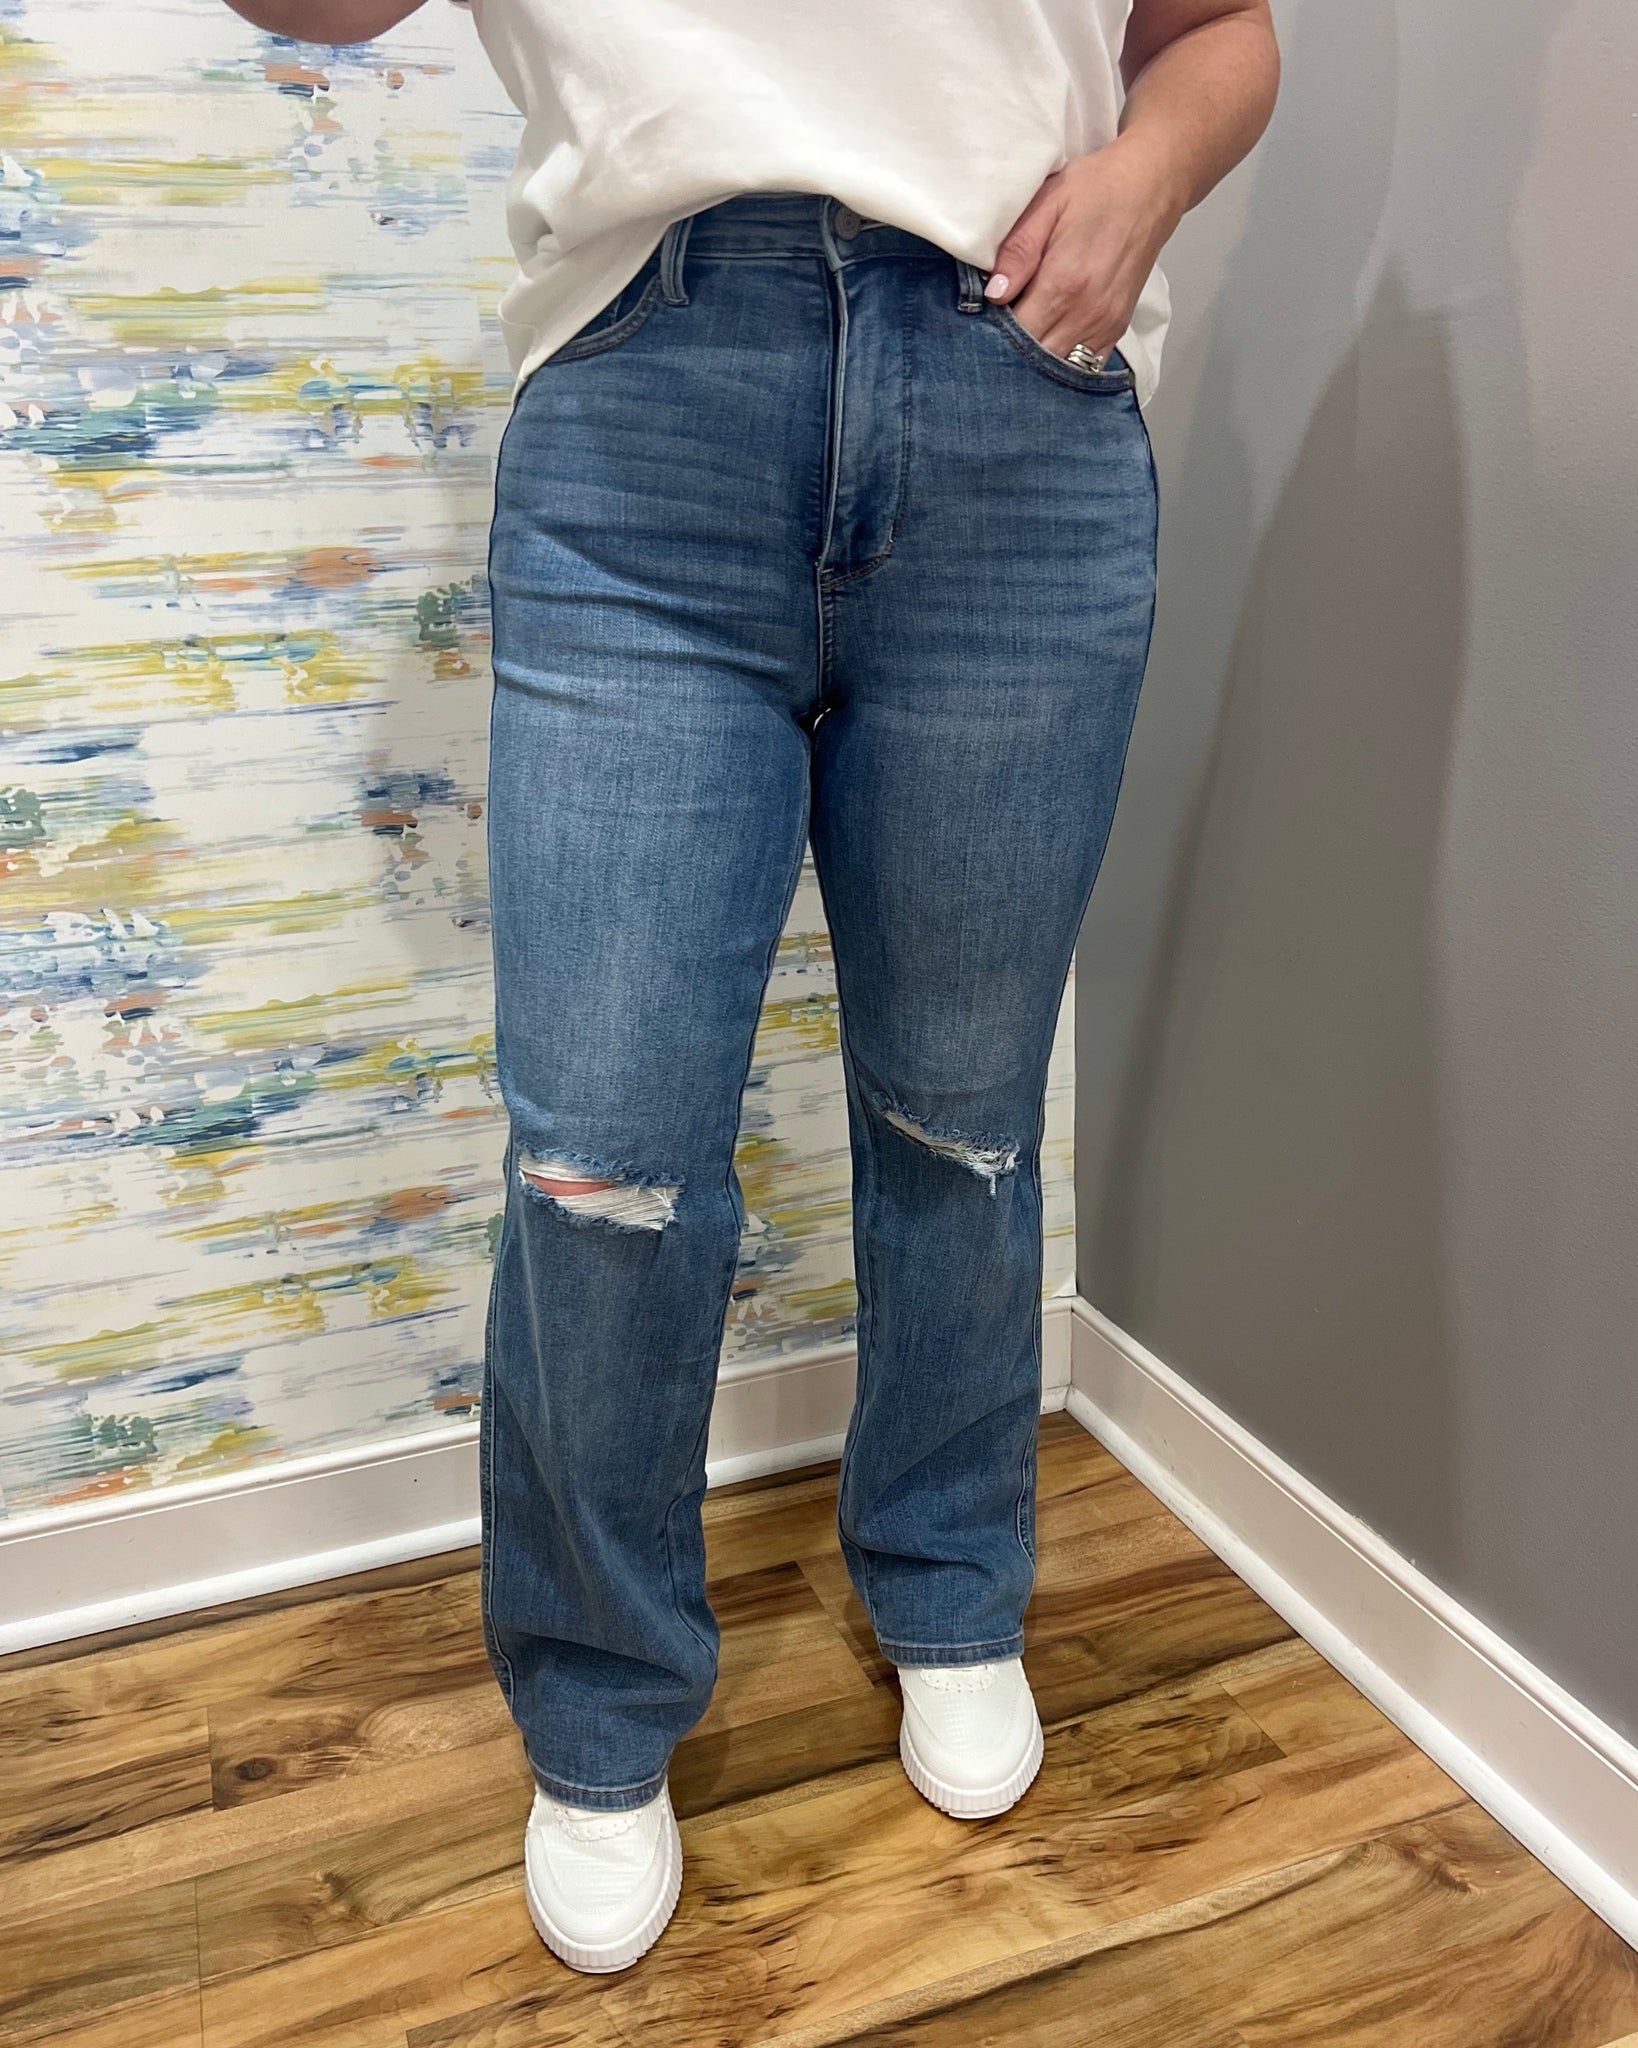 TOP 5 judy blue TUMMY CONTROL jeans! What other top 5 would you love t